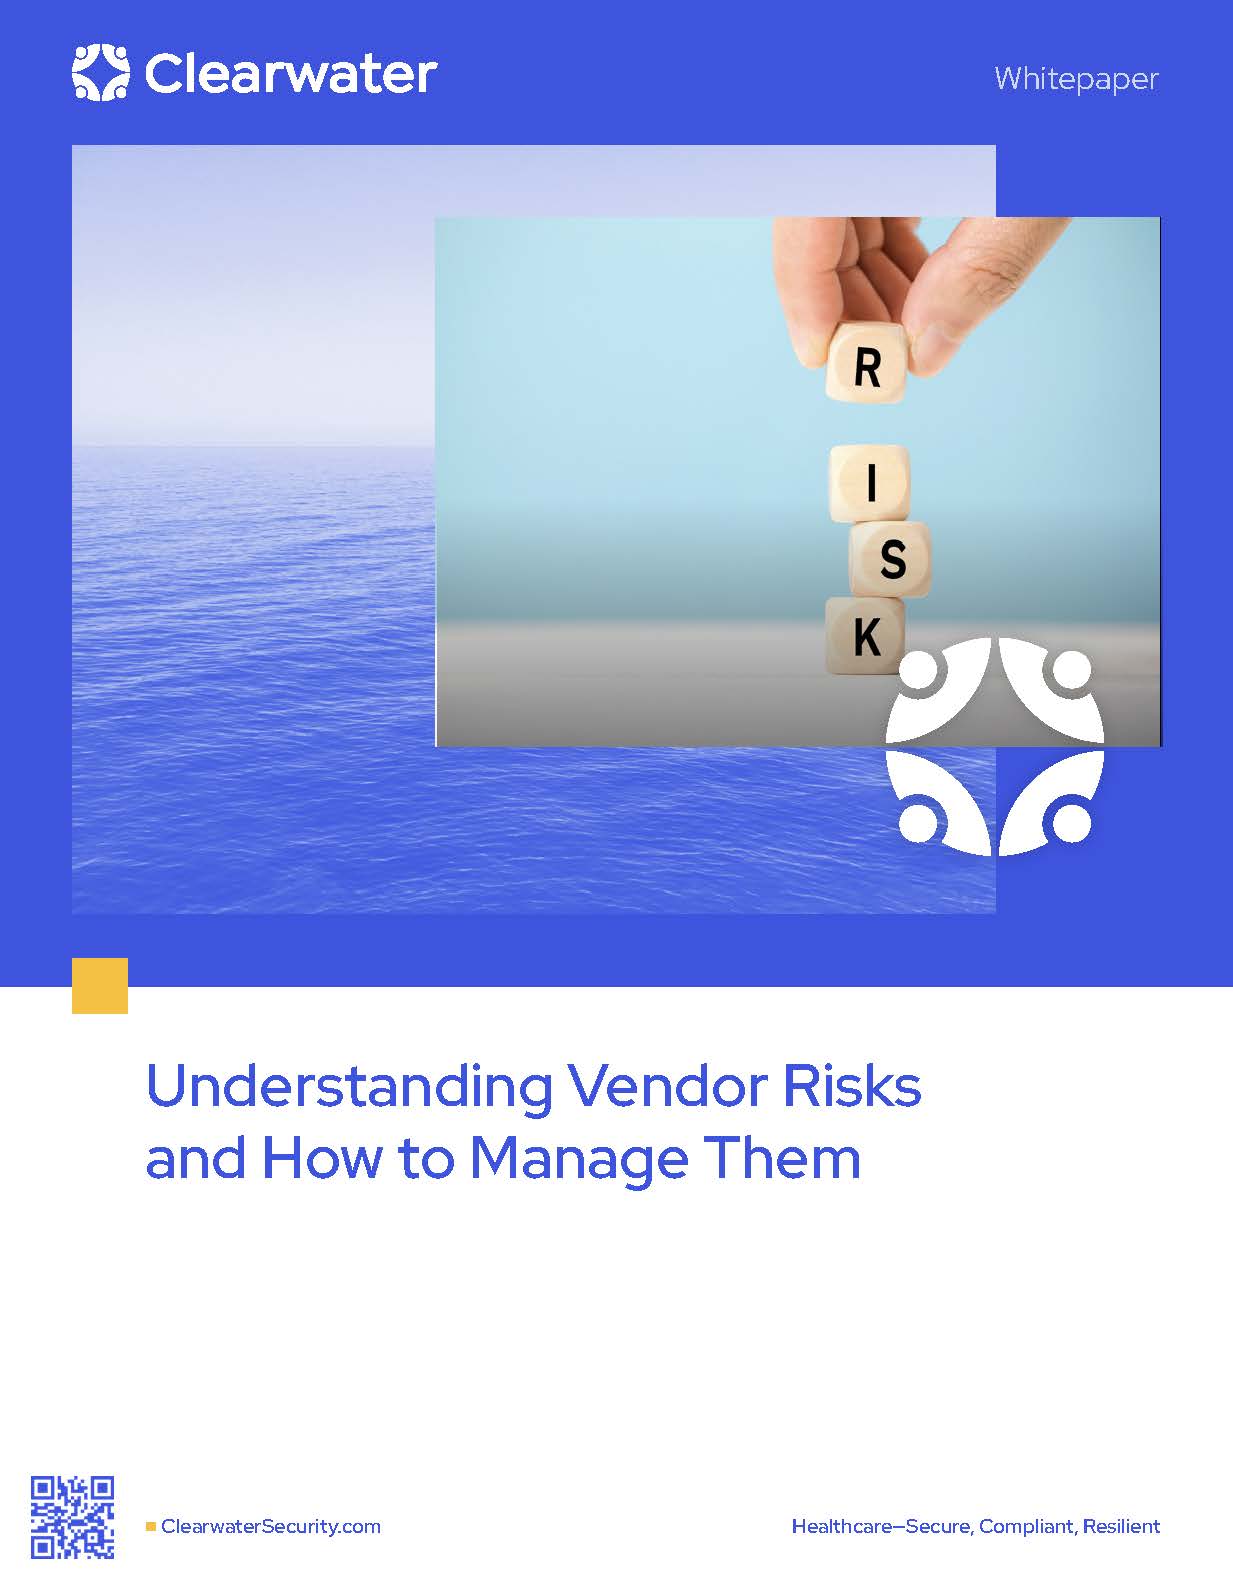 Understanding Vendor Risks and How to Manage Them by Clearwater